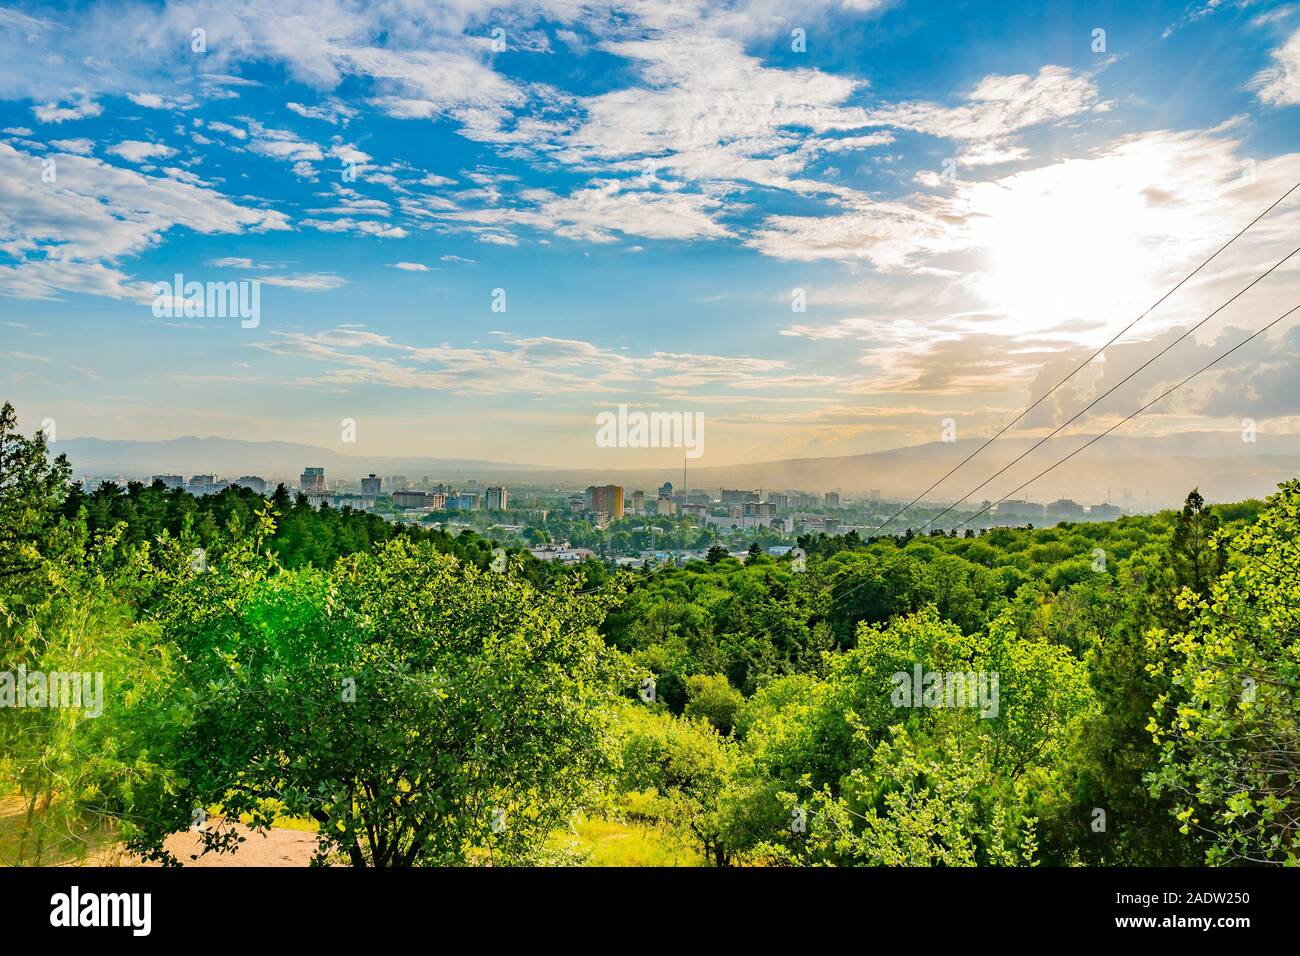 Dushanbe Victory Park Pobedy Picturesque Breathtaking Cityscape View on a Sunset Blue Sky Day Stock Photo